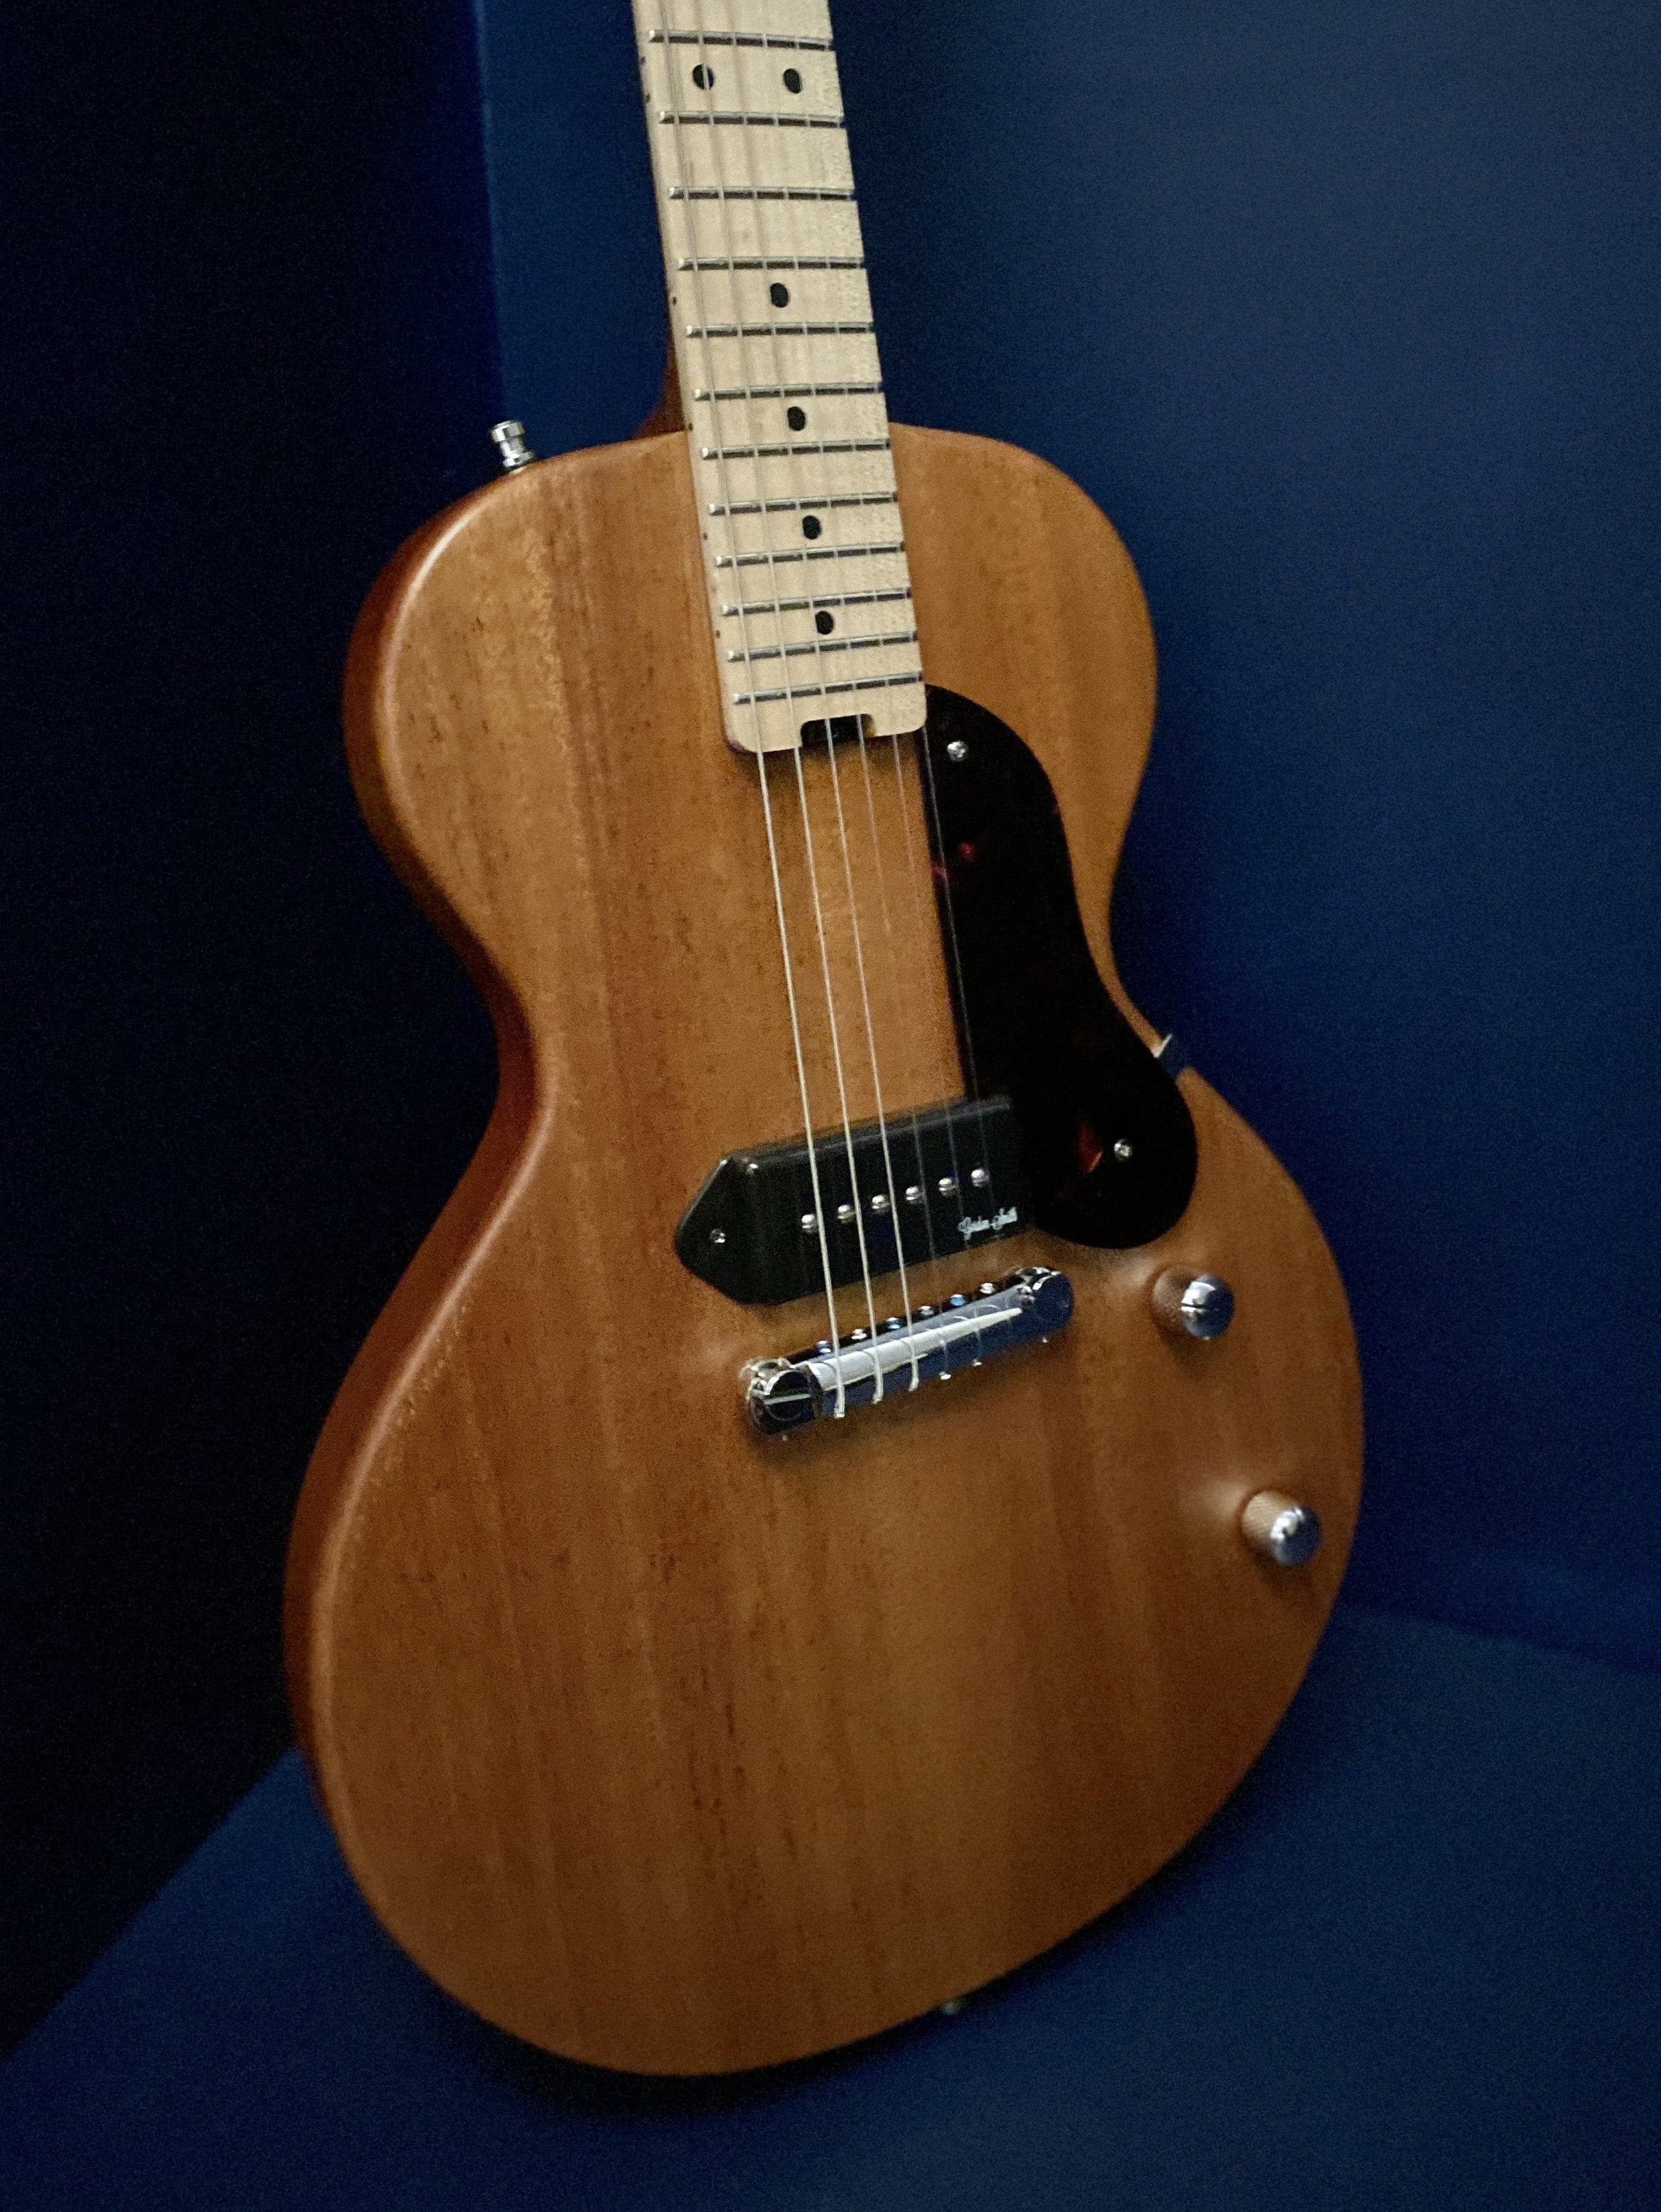 Gordon Smith GS No-Cut Natural Mahogany Maple Neck, Electric Guitar for sale at Richards Guitars.